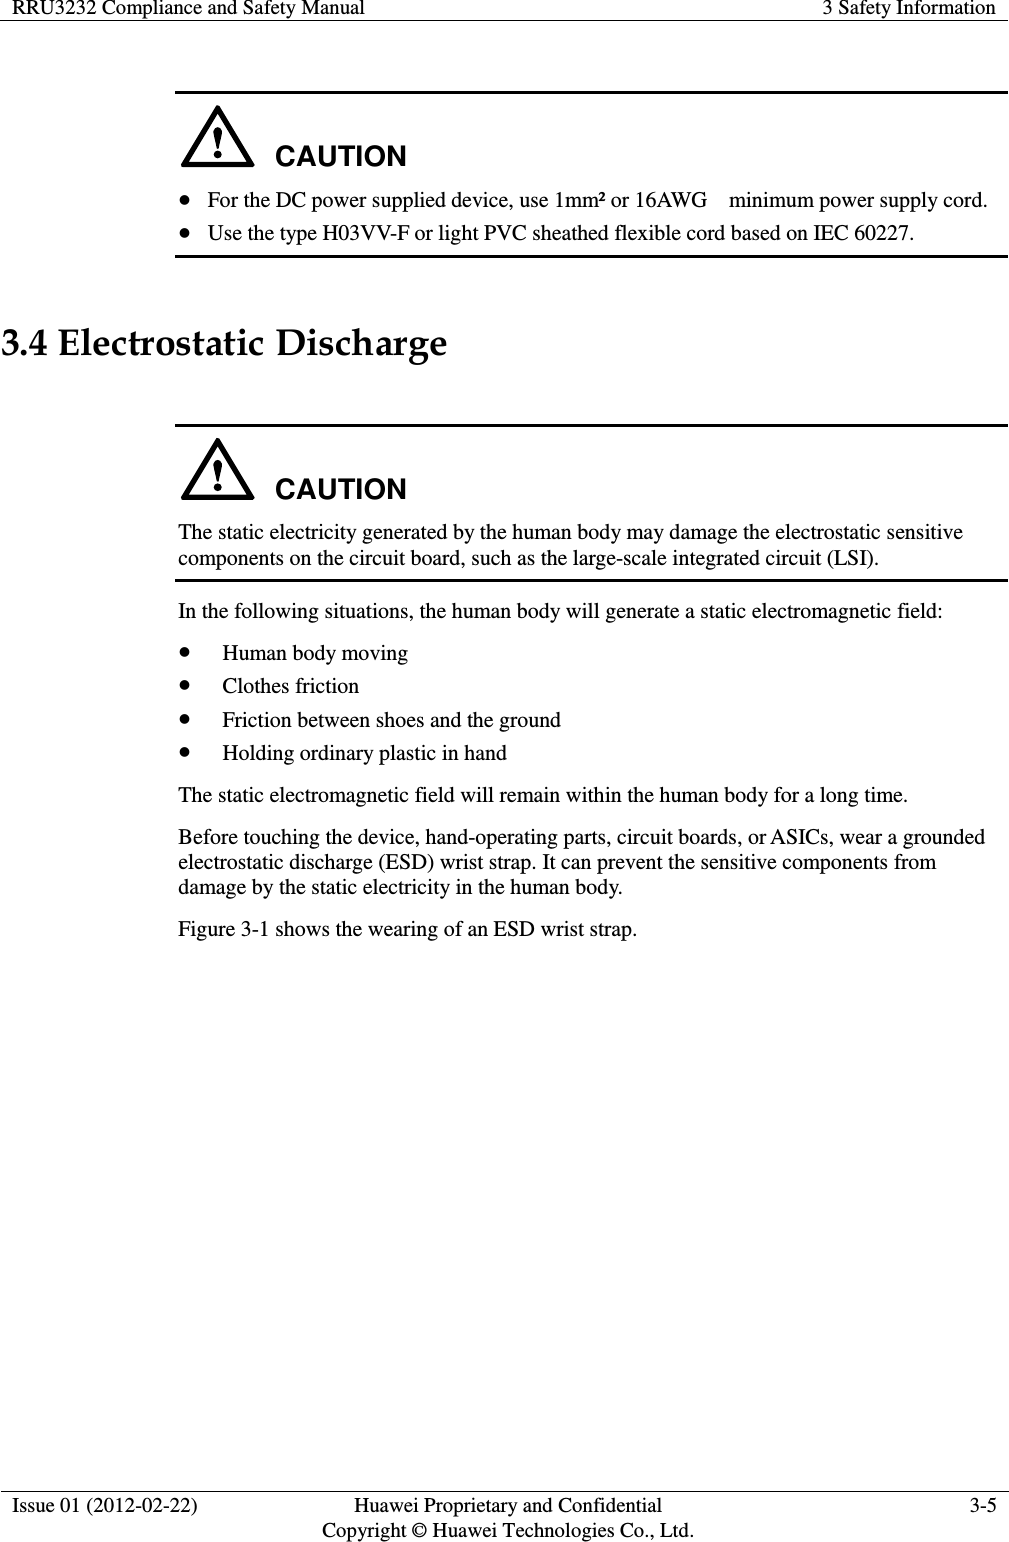 RRU3232 Compliance and Safety Manual 3 Safety Information  Issue 01 (2012-02-22) Huawei Proprietary and Confidential         Copyright © Huawei Technologies Co., Ltd. 3-5   CAUTION  For the DC power supplied device, use 1mm² or 16AWG    minimum power supply cord.  Use the type H03VV-F or light PVC sheathed flexible cord based on IEC 60227. 3.4 Electrostatic Discharge  CAUTION The static electricity generated by the human body may damage the electrostatic sensitive components on the circuit board, such as the large-scale integrated circuit (LSI). In the following situations, the human body will generate a static electromagnetic field:  Human body moving  Clothes friction  Friction between shoes and the ground  Holding ordinary plastic in hand The static electromagnetic field will remain within the human body for a long time. Before touching the device, hand-operating parts, circuit boards, or ASICs, wear a grounded electrostatic discharge (ESD) wrist strap. It can prevent the sensitive components from damage by the static electricity in the human body. Figure 3-1 shows the wearing of an ESD wrist strap. 